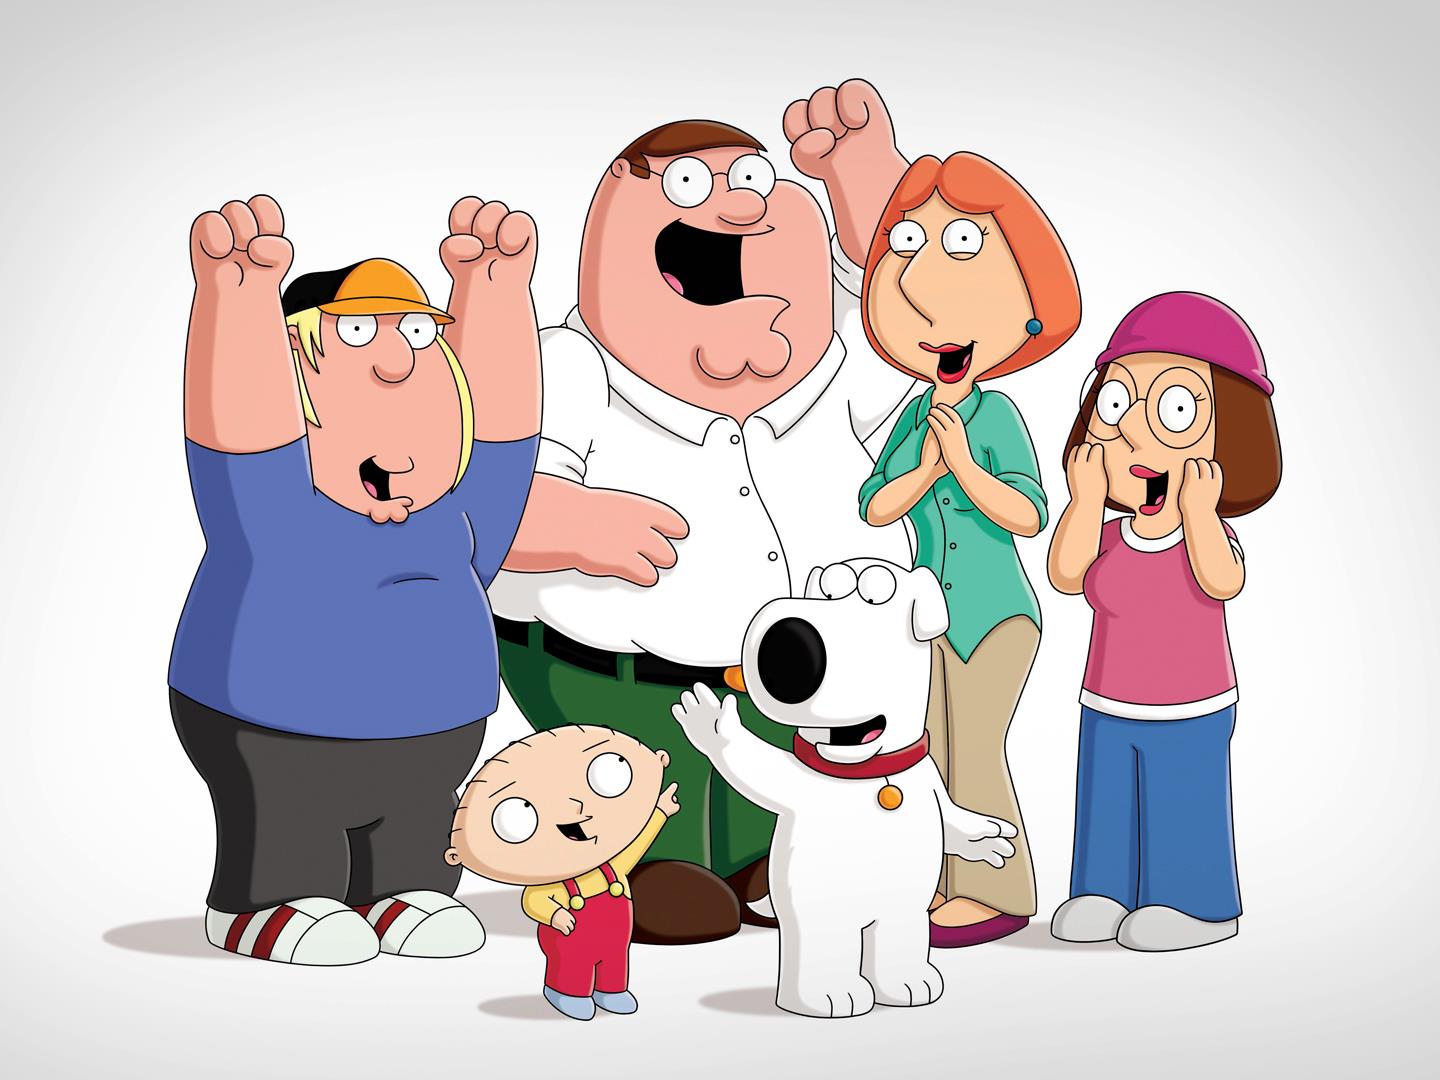 Comic-Con Update: 'The Simpsons' and 'Family Guy' Debut a Sneak Peek of